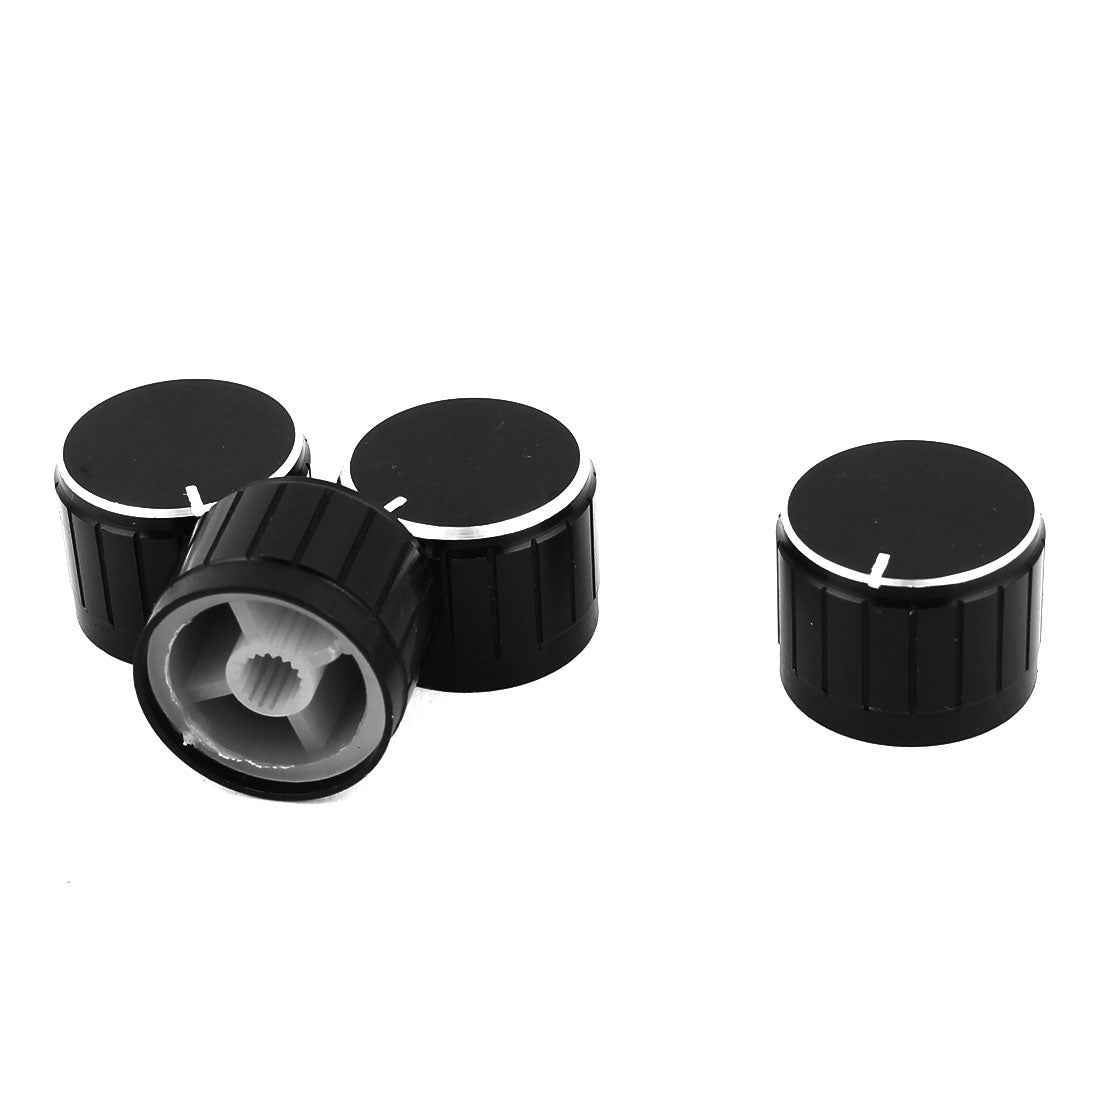 uxcell Uxcell 4 Pcs Black Silver Tone Plastic Potentiometer Rotary Control Knobs Caps 17x21mm